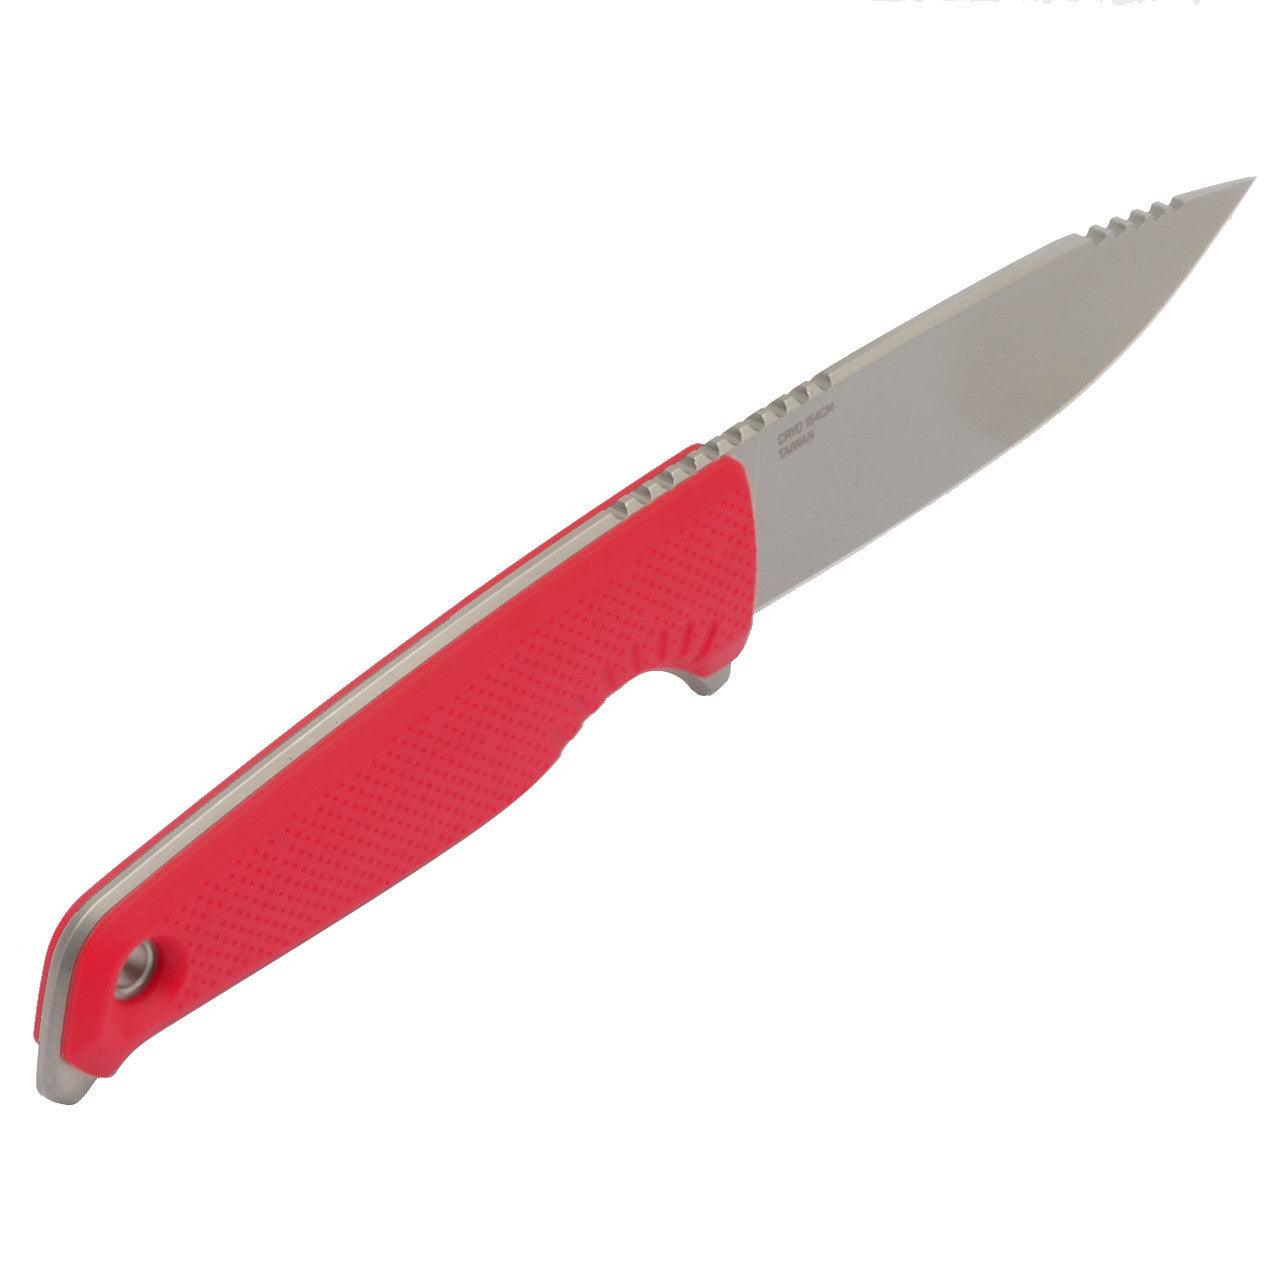 SOG Altair FX Fixed Blade Canyon Red GRN Clip Point TiNi CRYO CPM 154 - Knives.mx